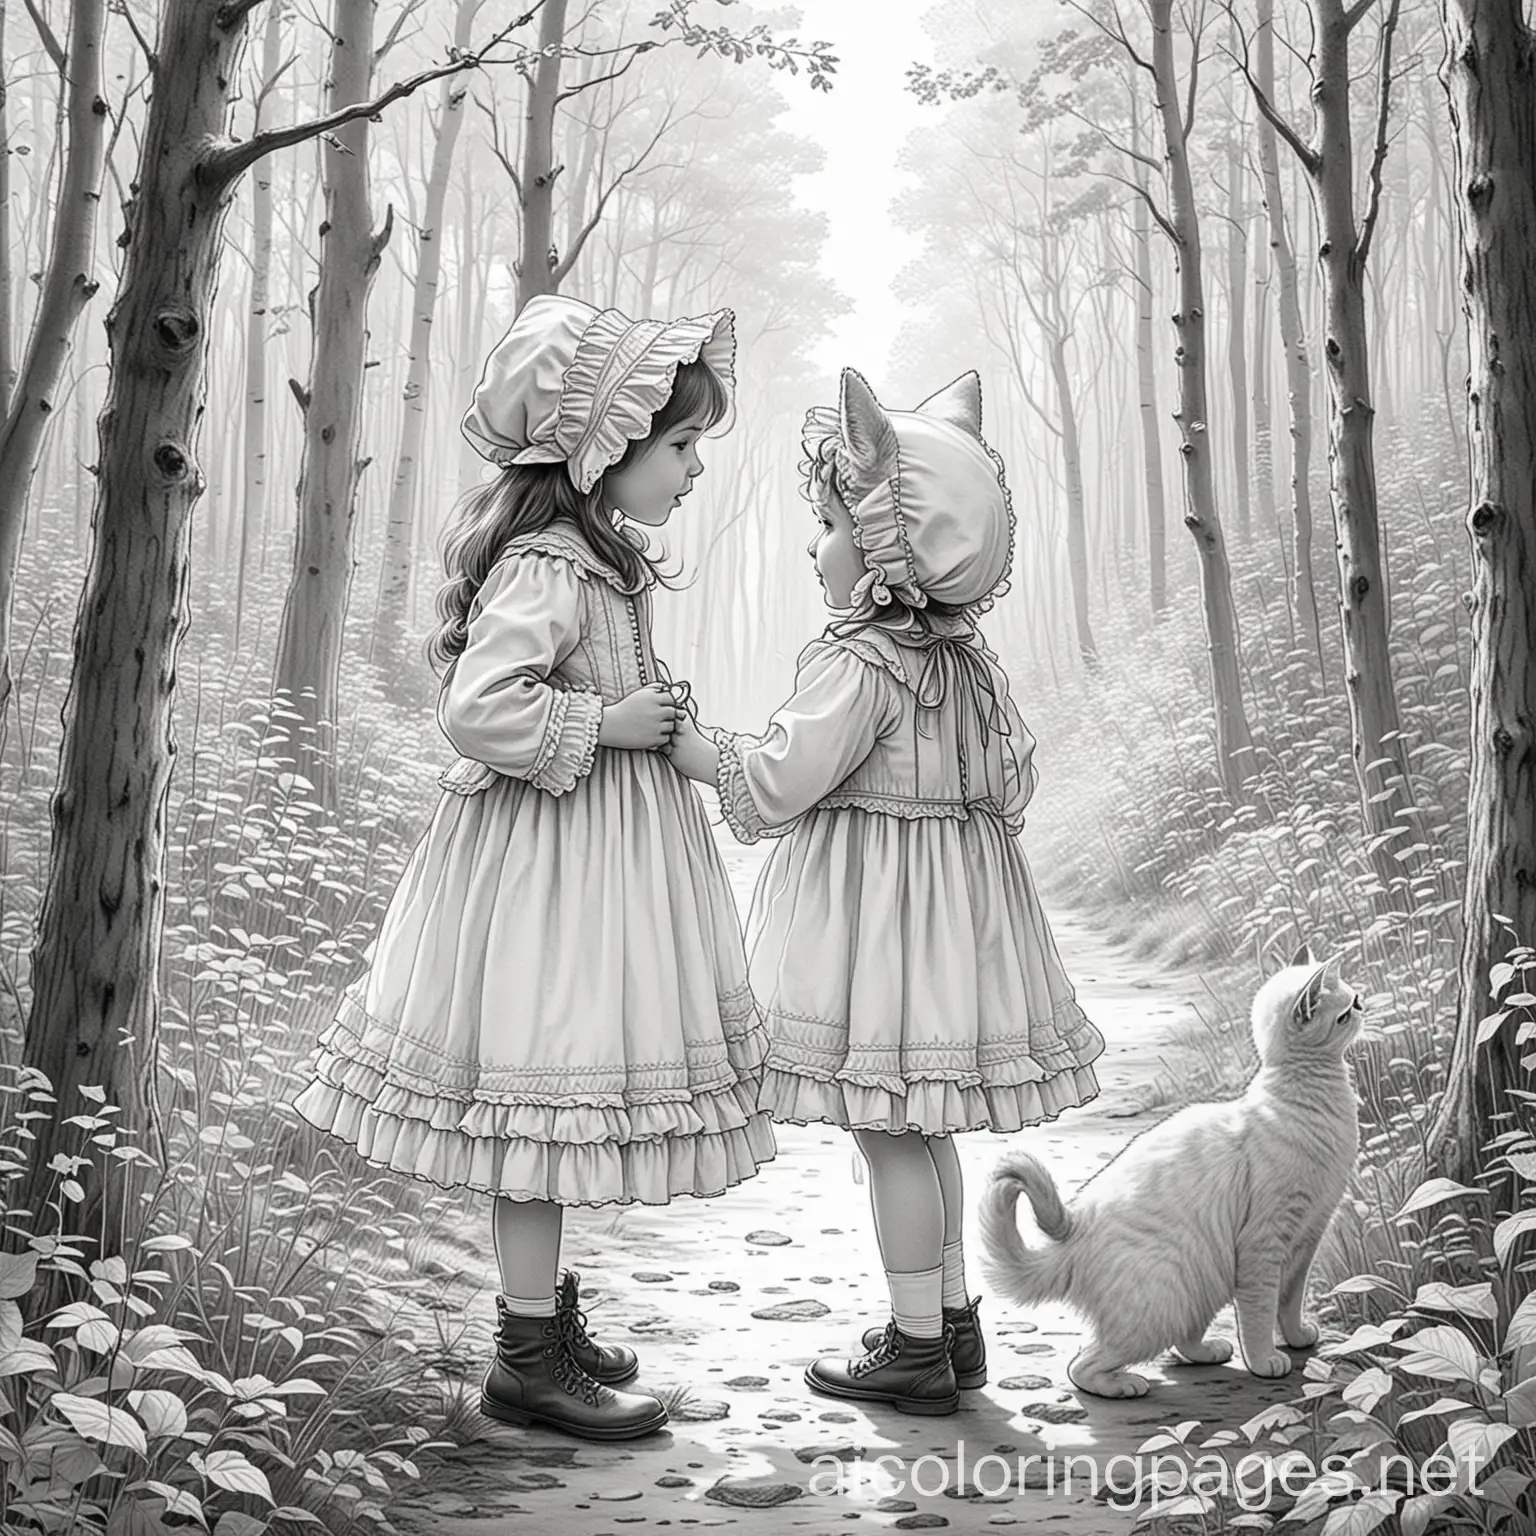 a little girl wearing old fashioned traditional clothes like an old frilly bonnet and playing with a cat in a beautiful forest, Coloring Page, black and white, line art, white background, Simplicity, Ample White Space.